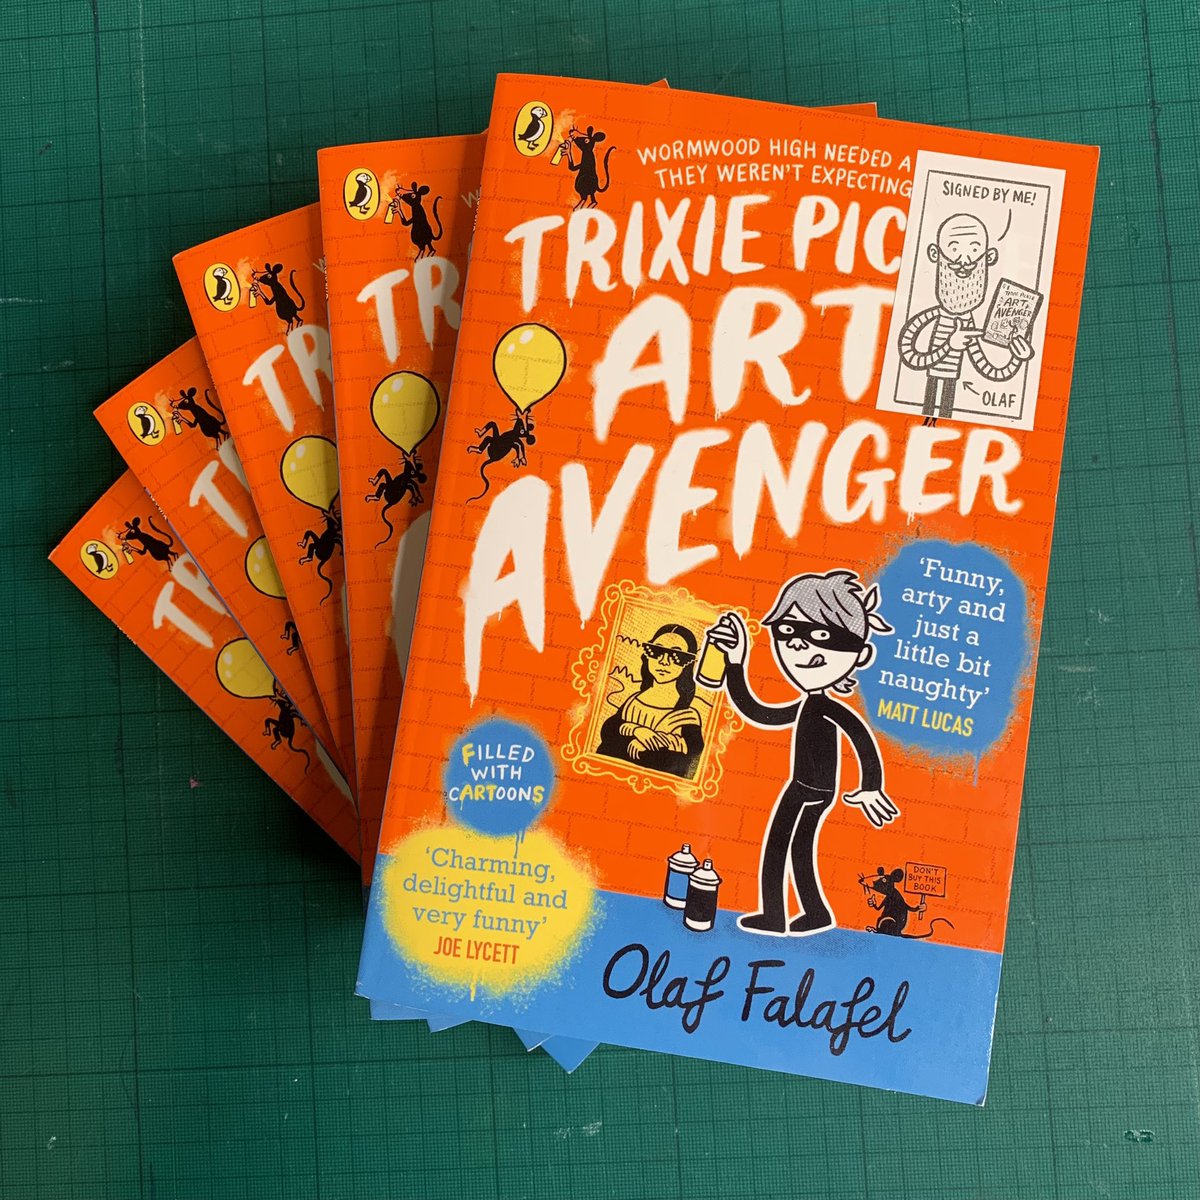 📚Win Stuff!!! 📚 As it’s World Book Day next week, I’ve got FIVE signed copies of Trixie Pickle Art Avenger to give away to a lucky person/school. To enter simply retweet 🔄 and follow 👀 and I’ll pick a winner on #WorldBookDay #Competition #Win #teachertwitter #edutwitter